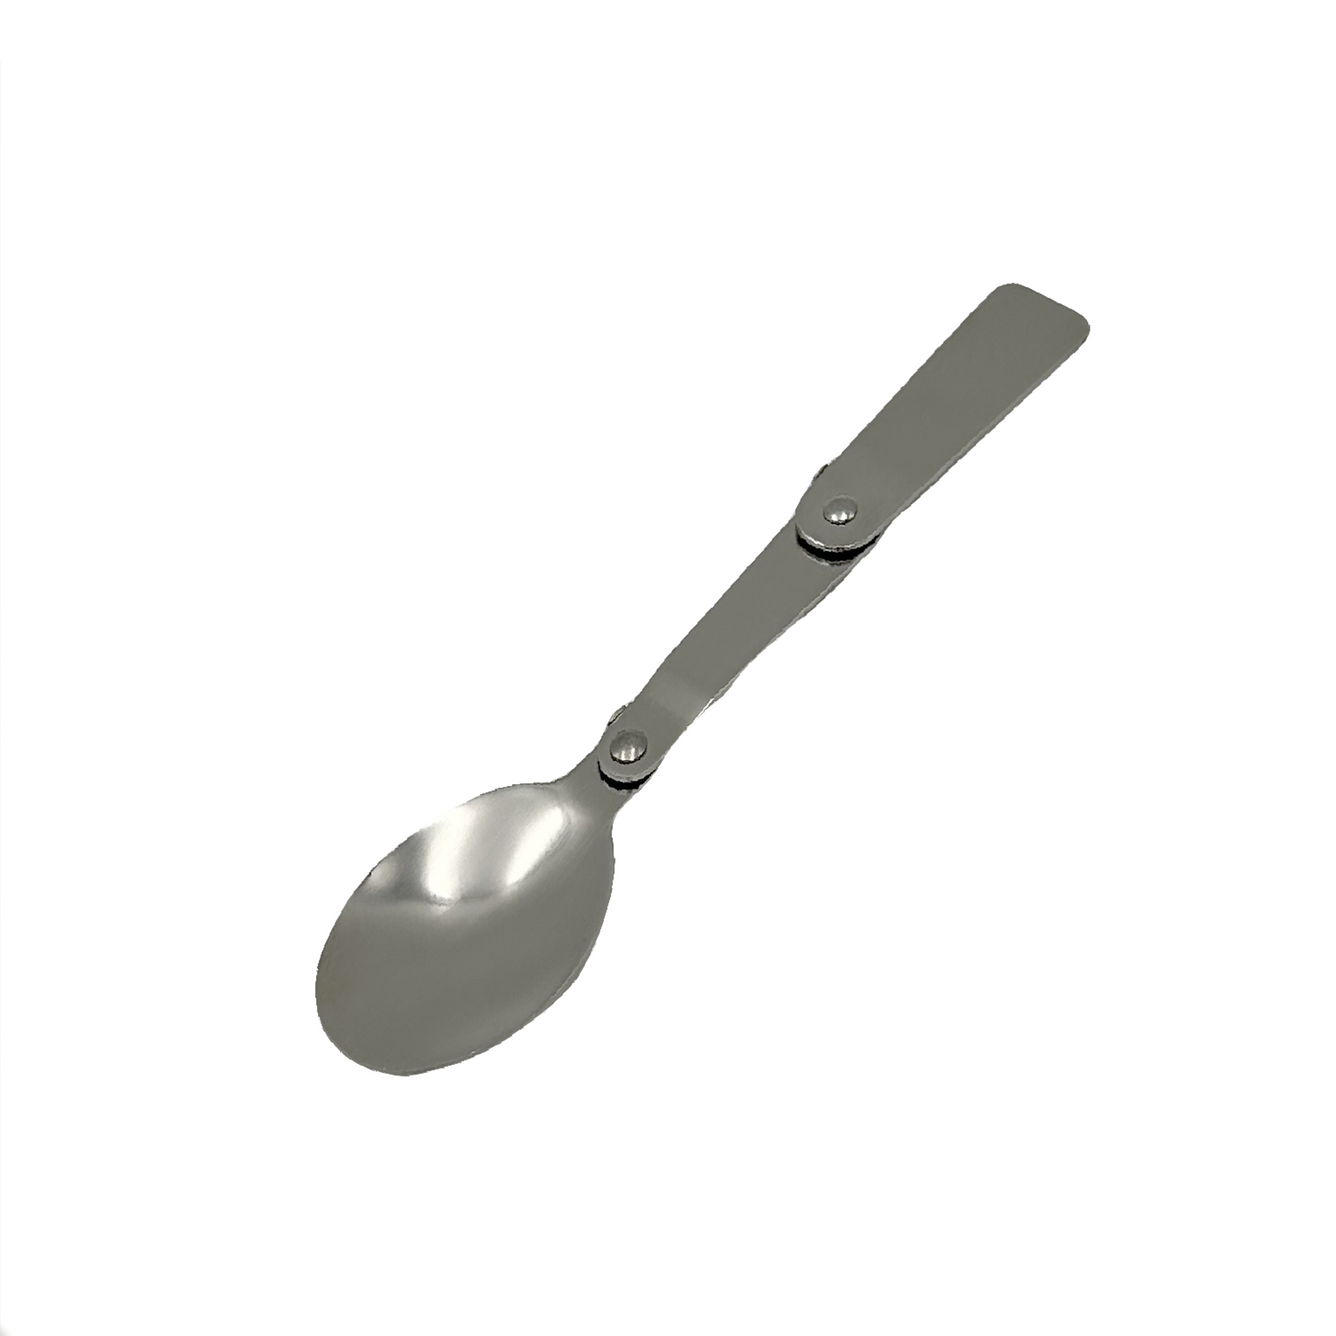 Stainless steel foldable spoon